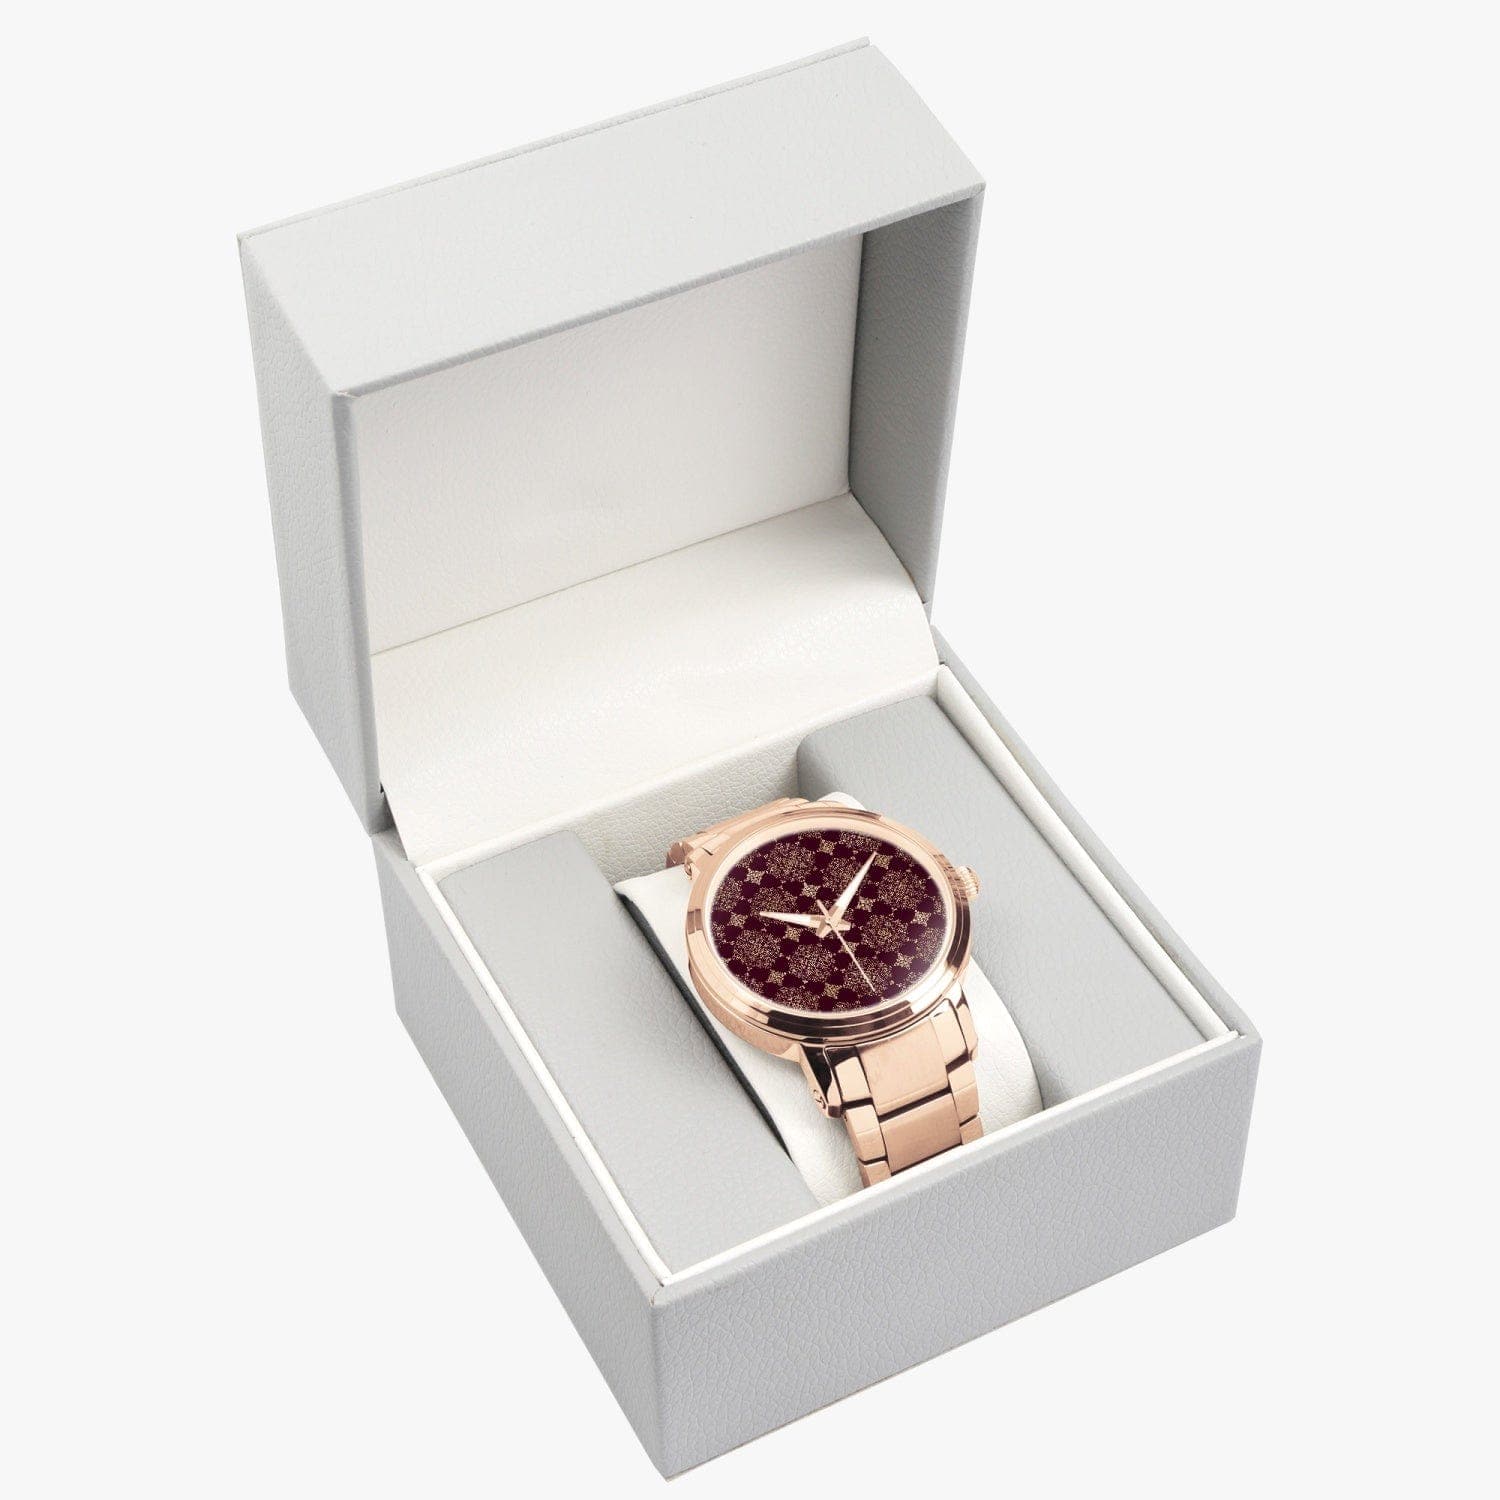 Dark Rose and Gold Damask Patterned New Steel Strap Automatic Watch, by Sensus Studio Design